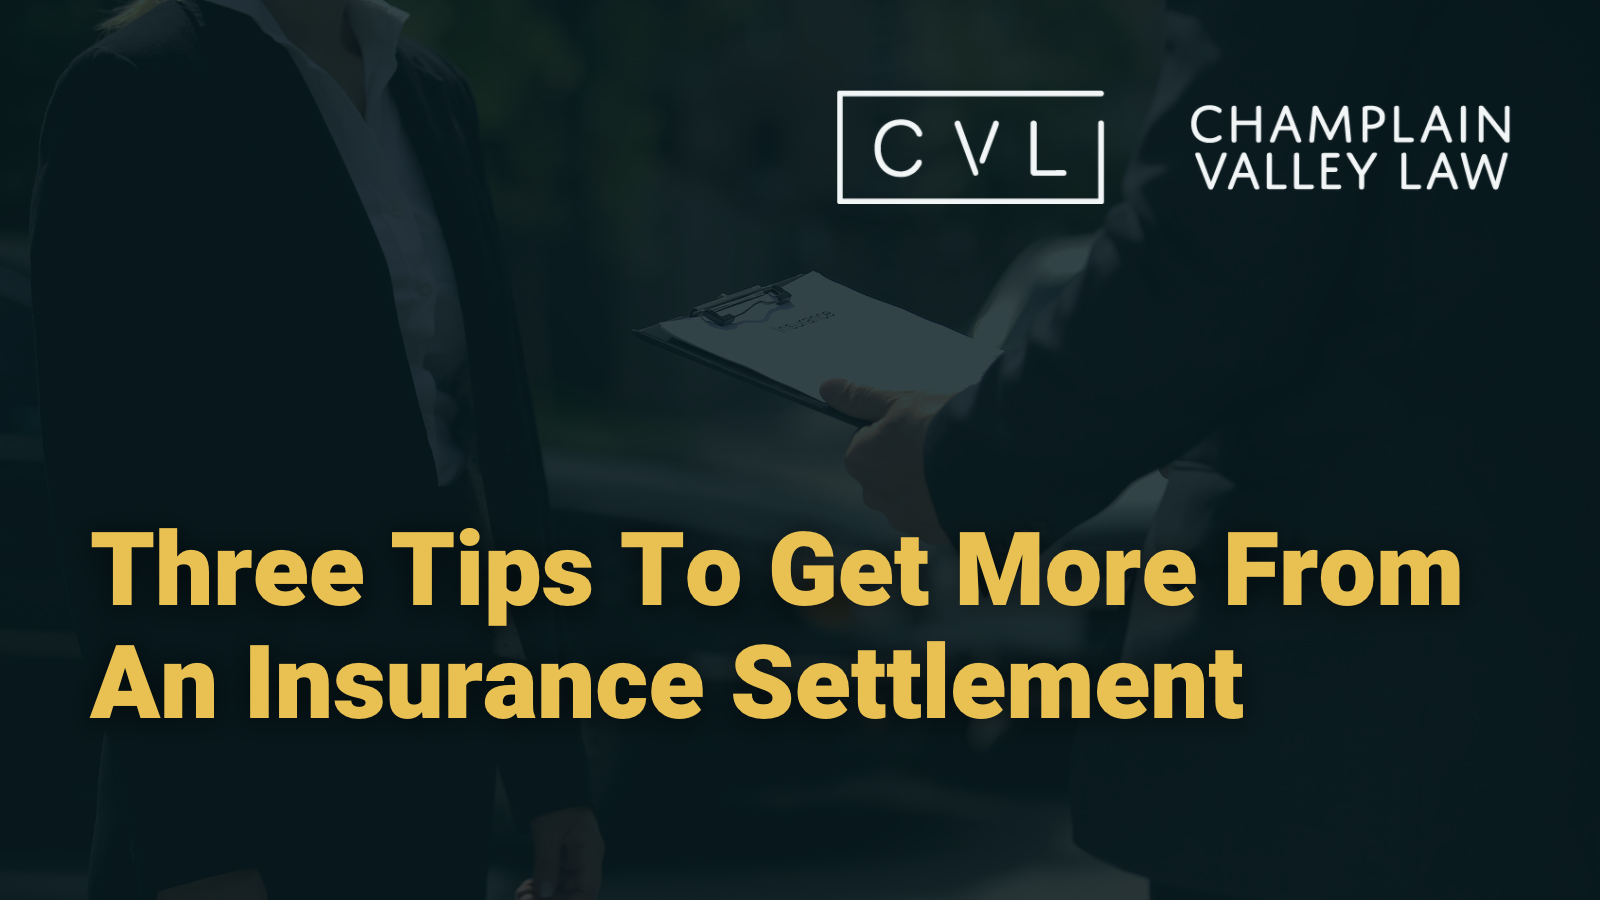 Three Tips To Get More From An Insurance Settlement in vermont - Champlain Valley Law - Attorney Drew Palcsik